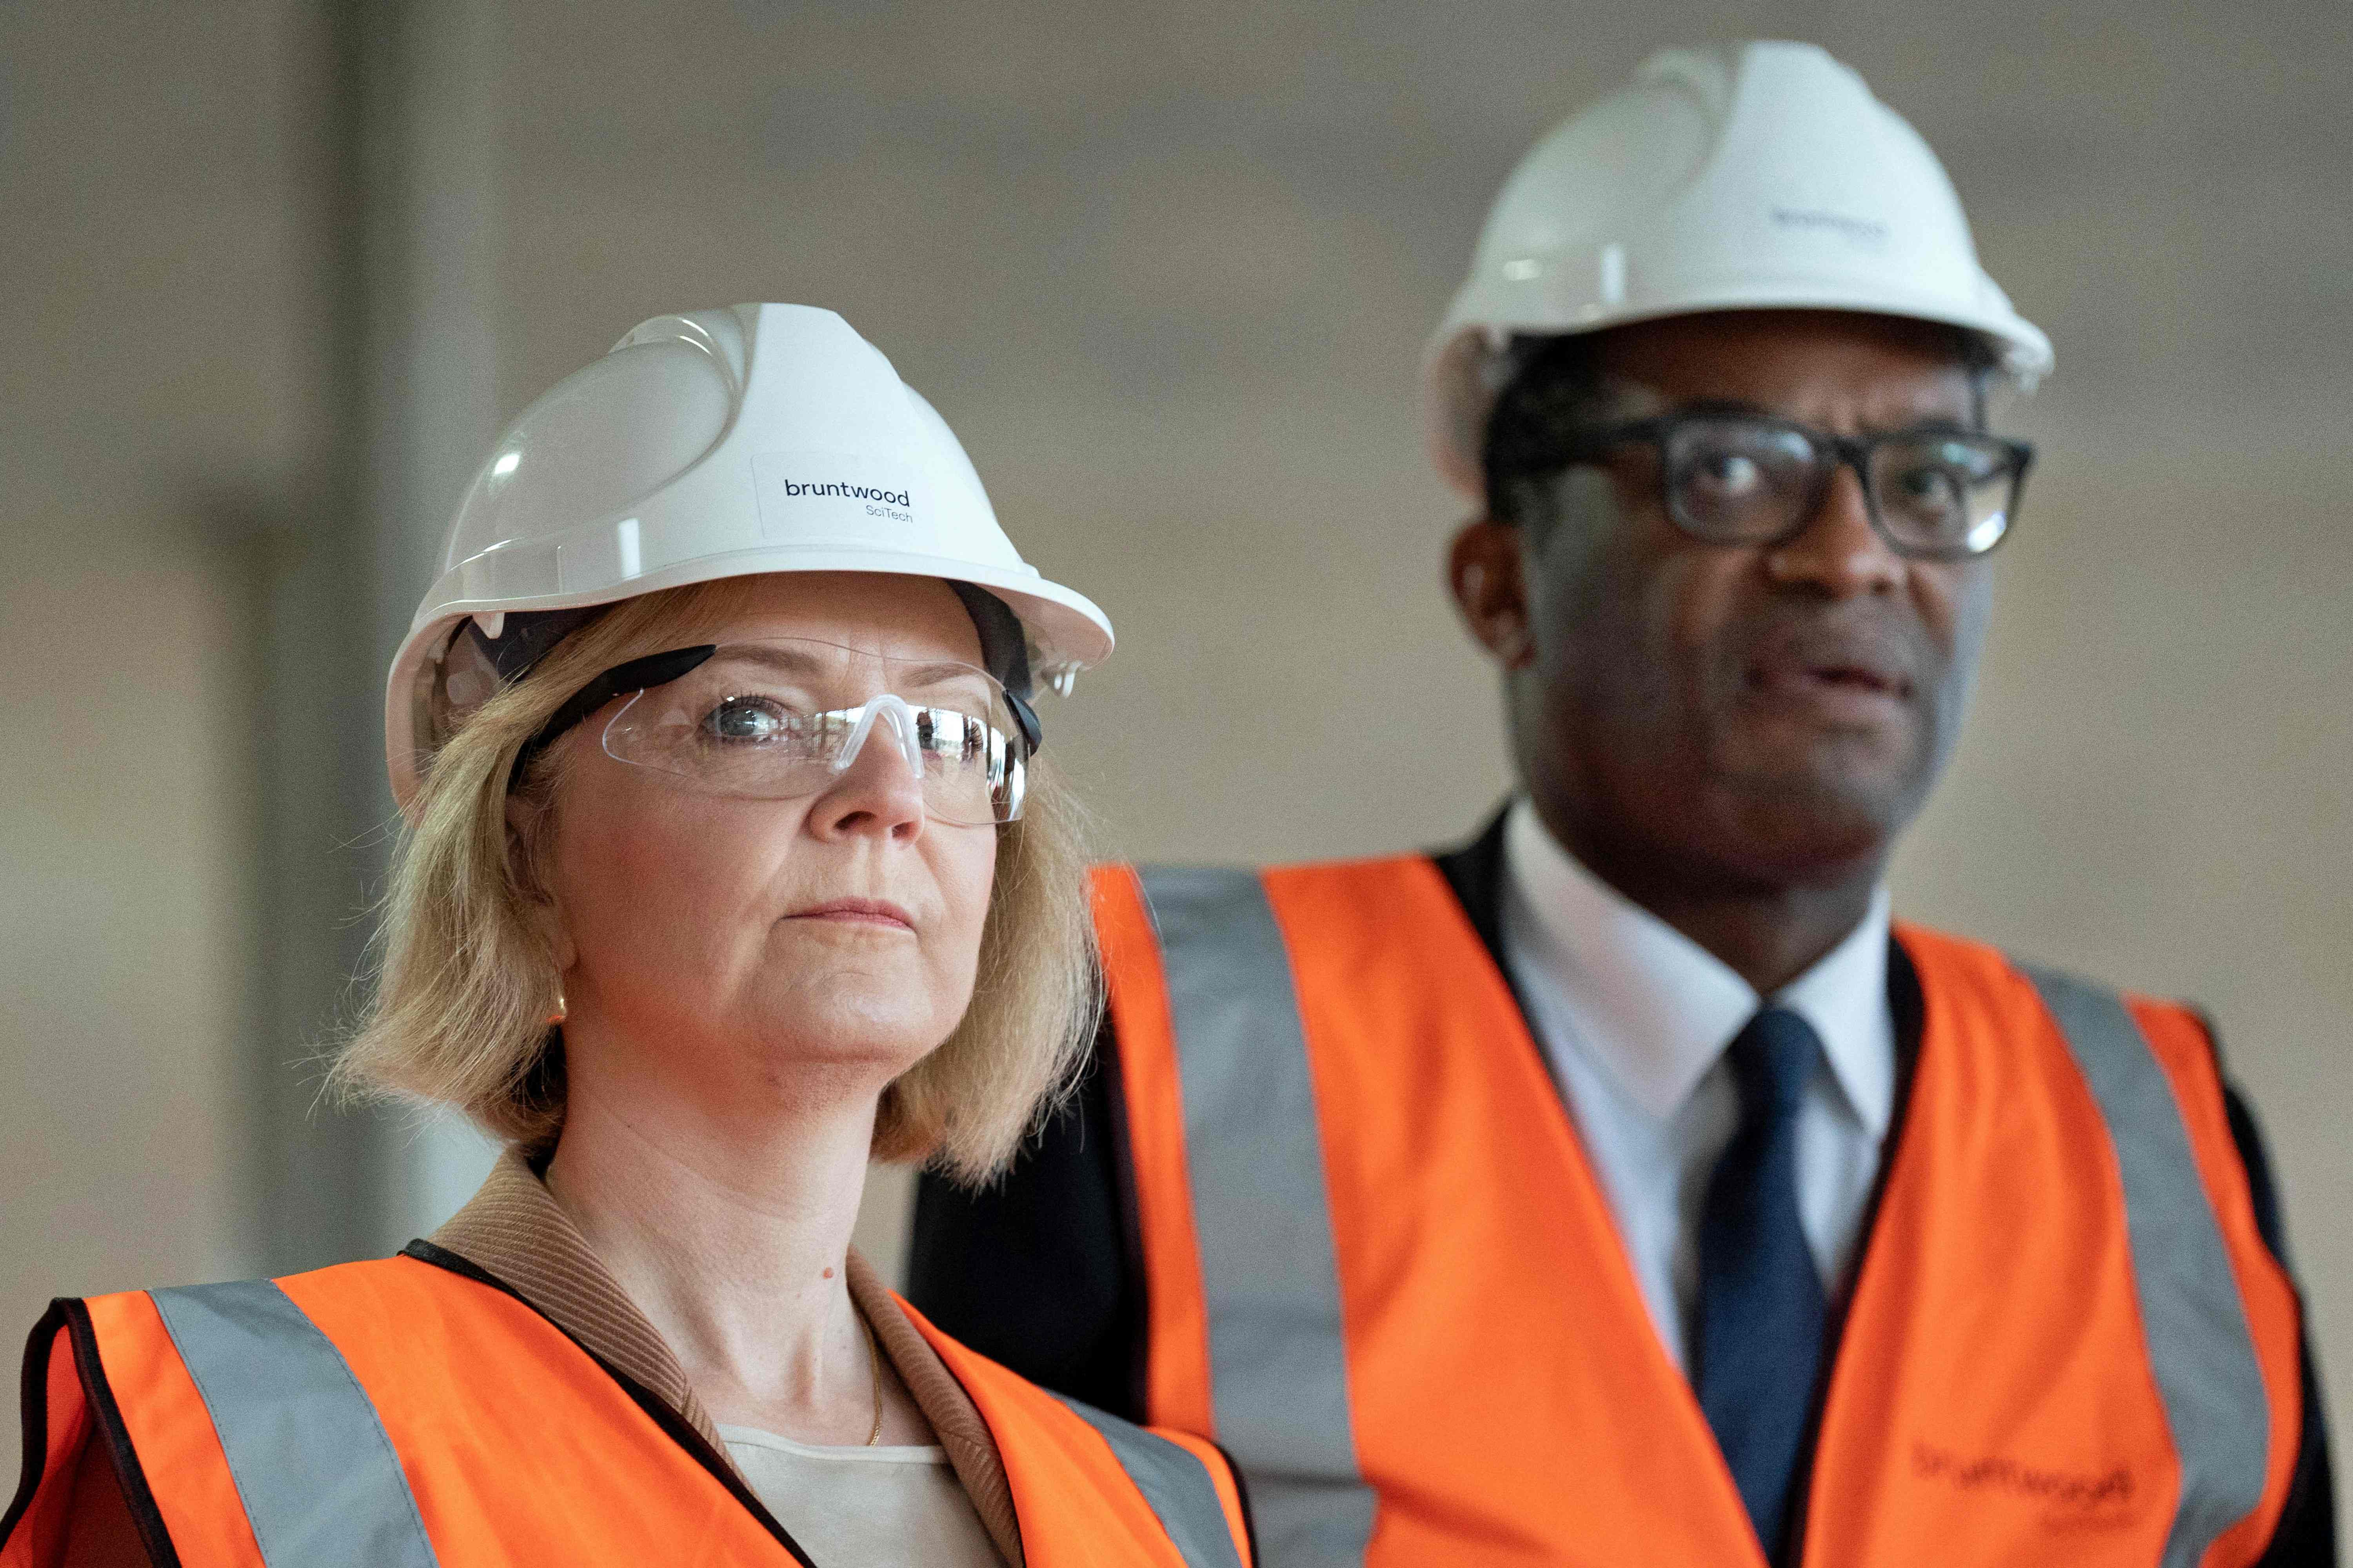 Liz Truss and Kwasi Kwarteng face a trade-off between political and economic credibility